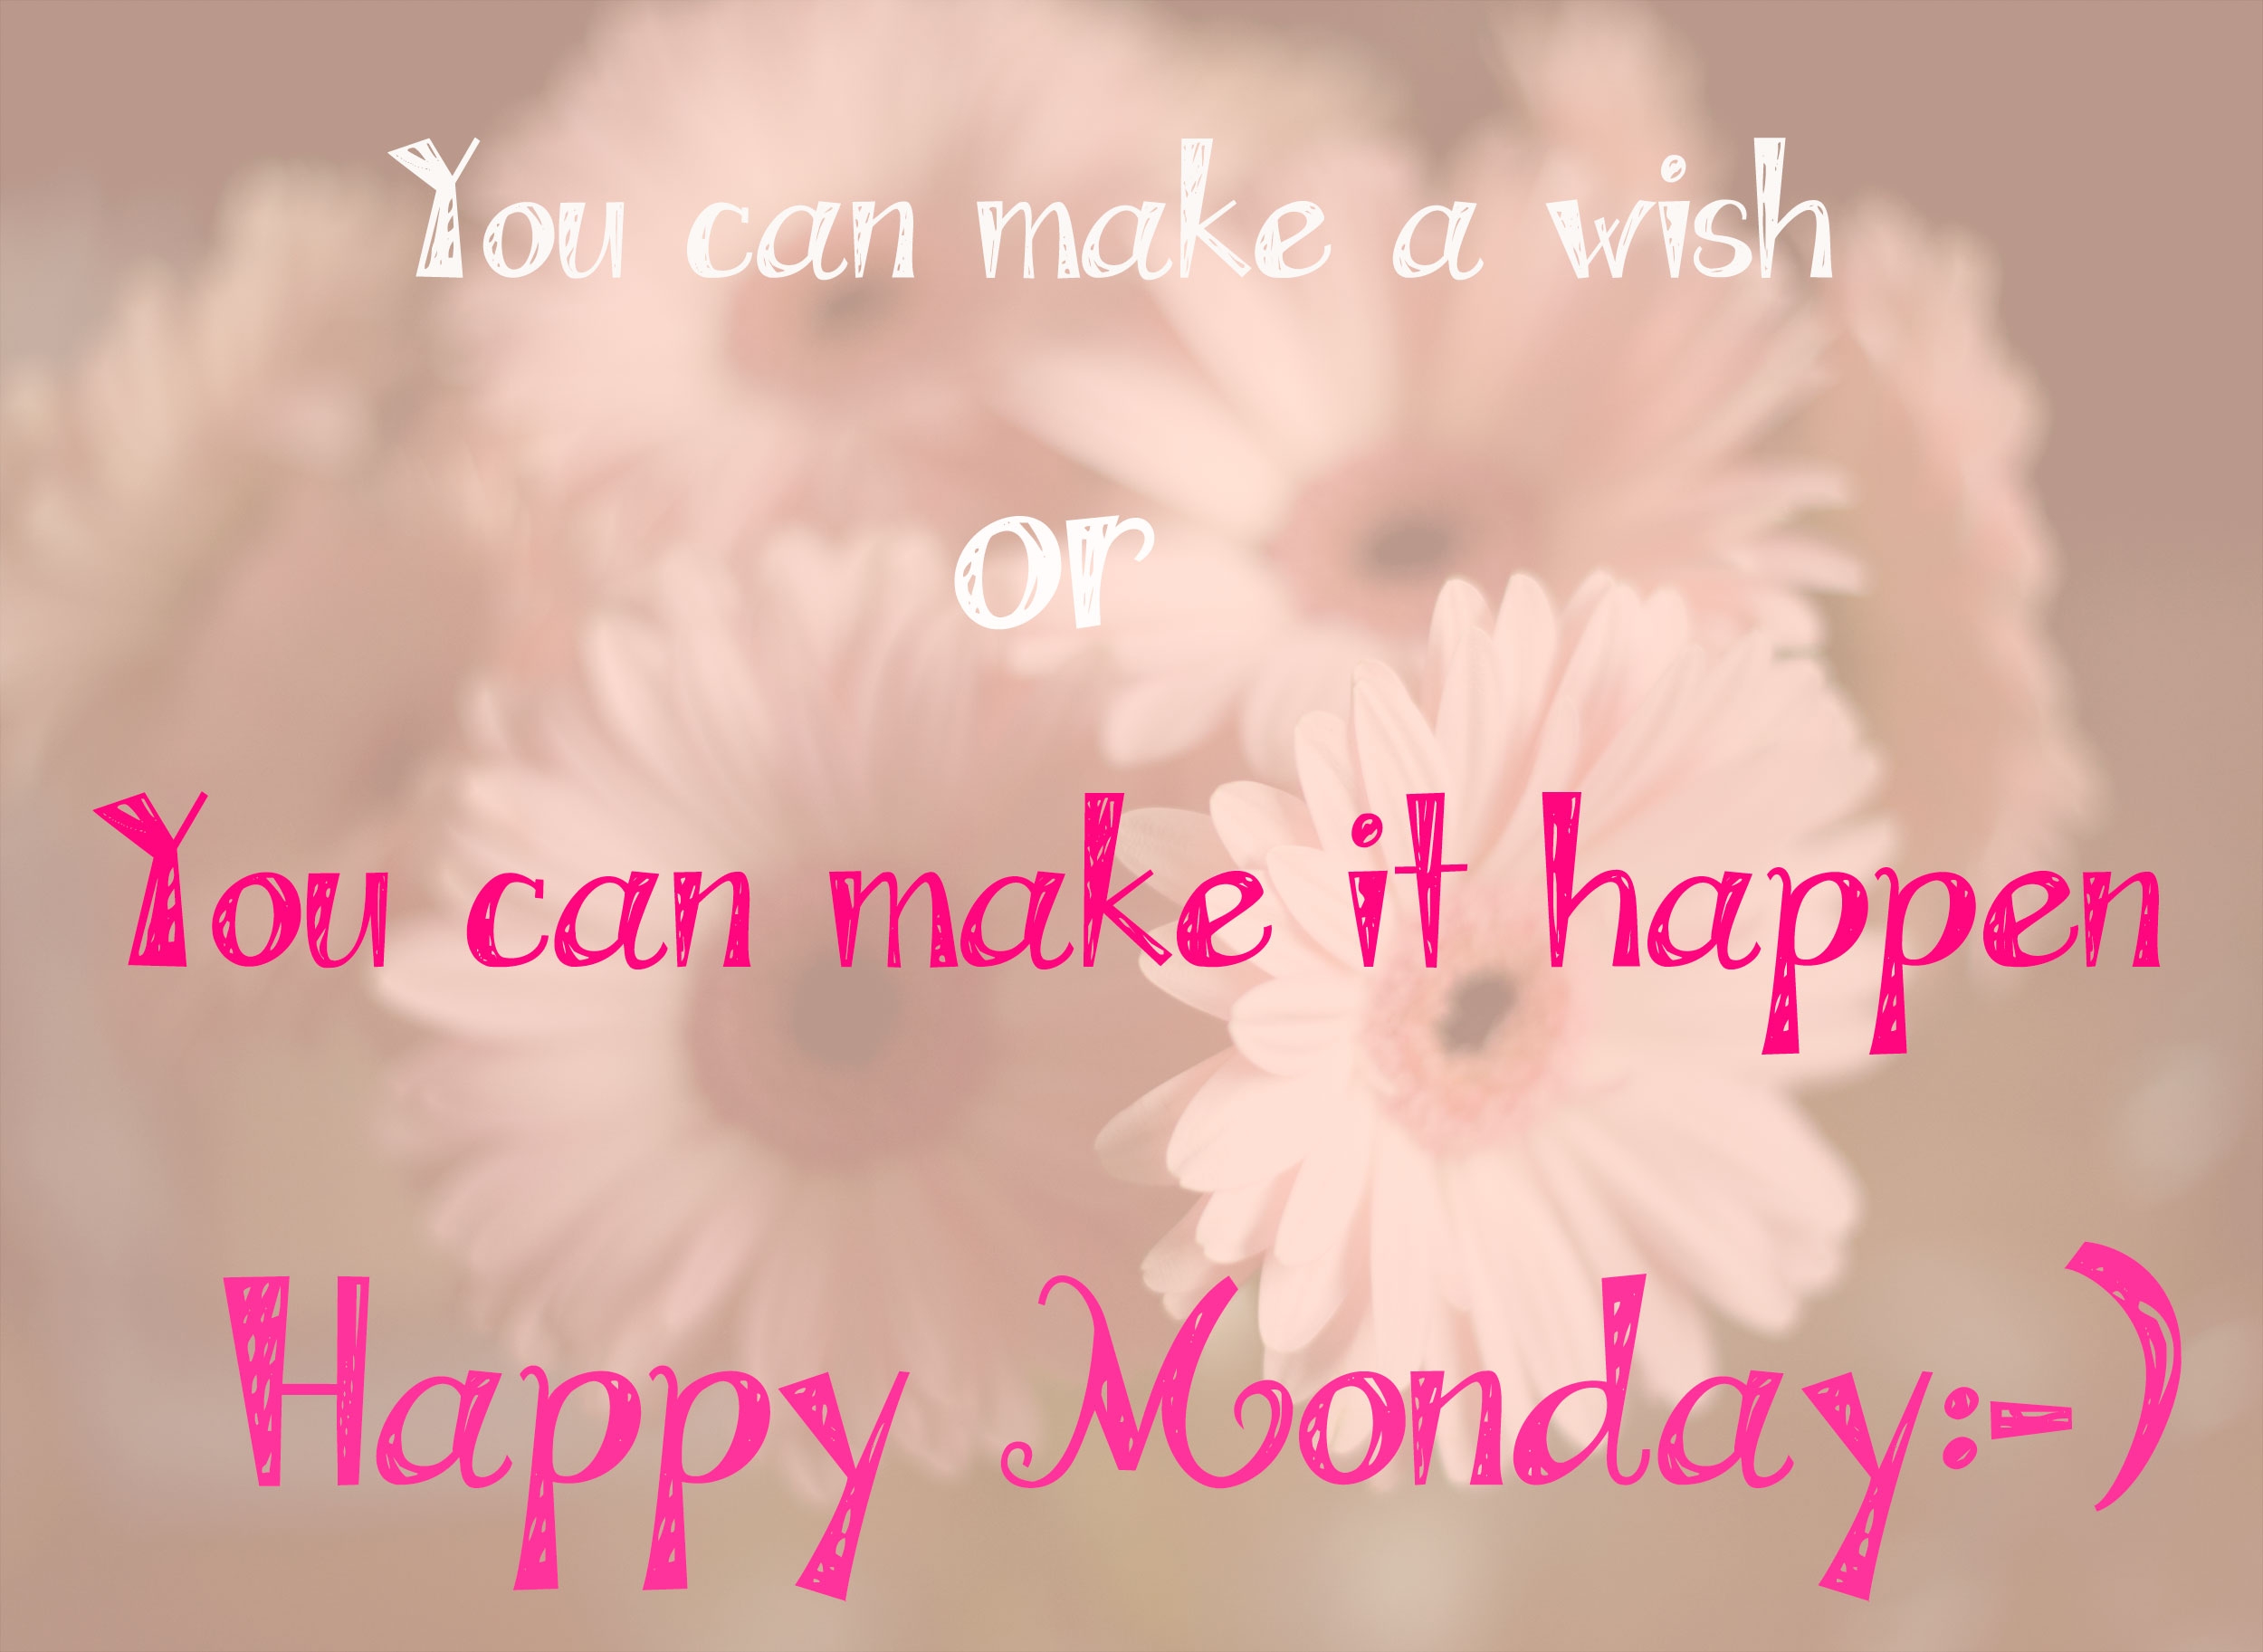 happy monday images Happiness quotes charming happy monday and images jpg